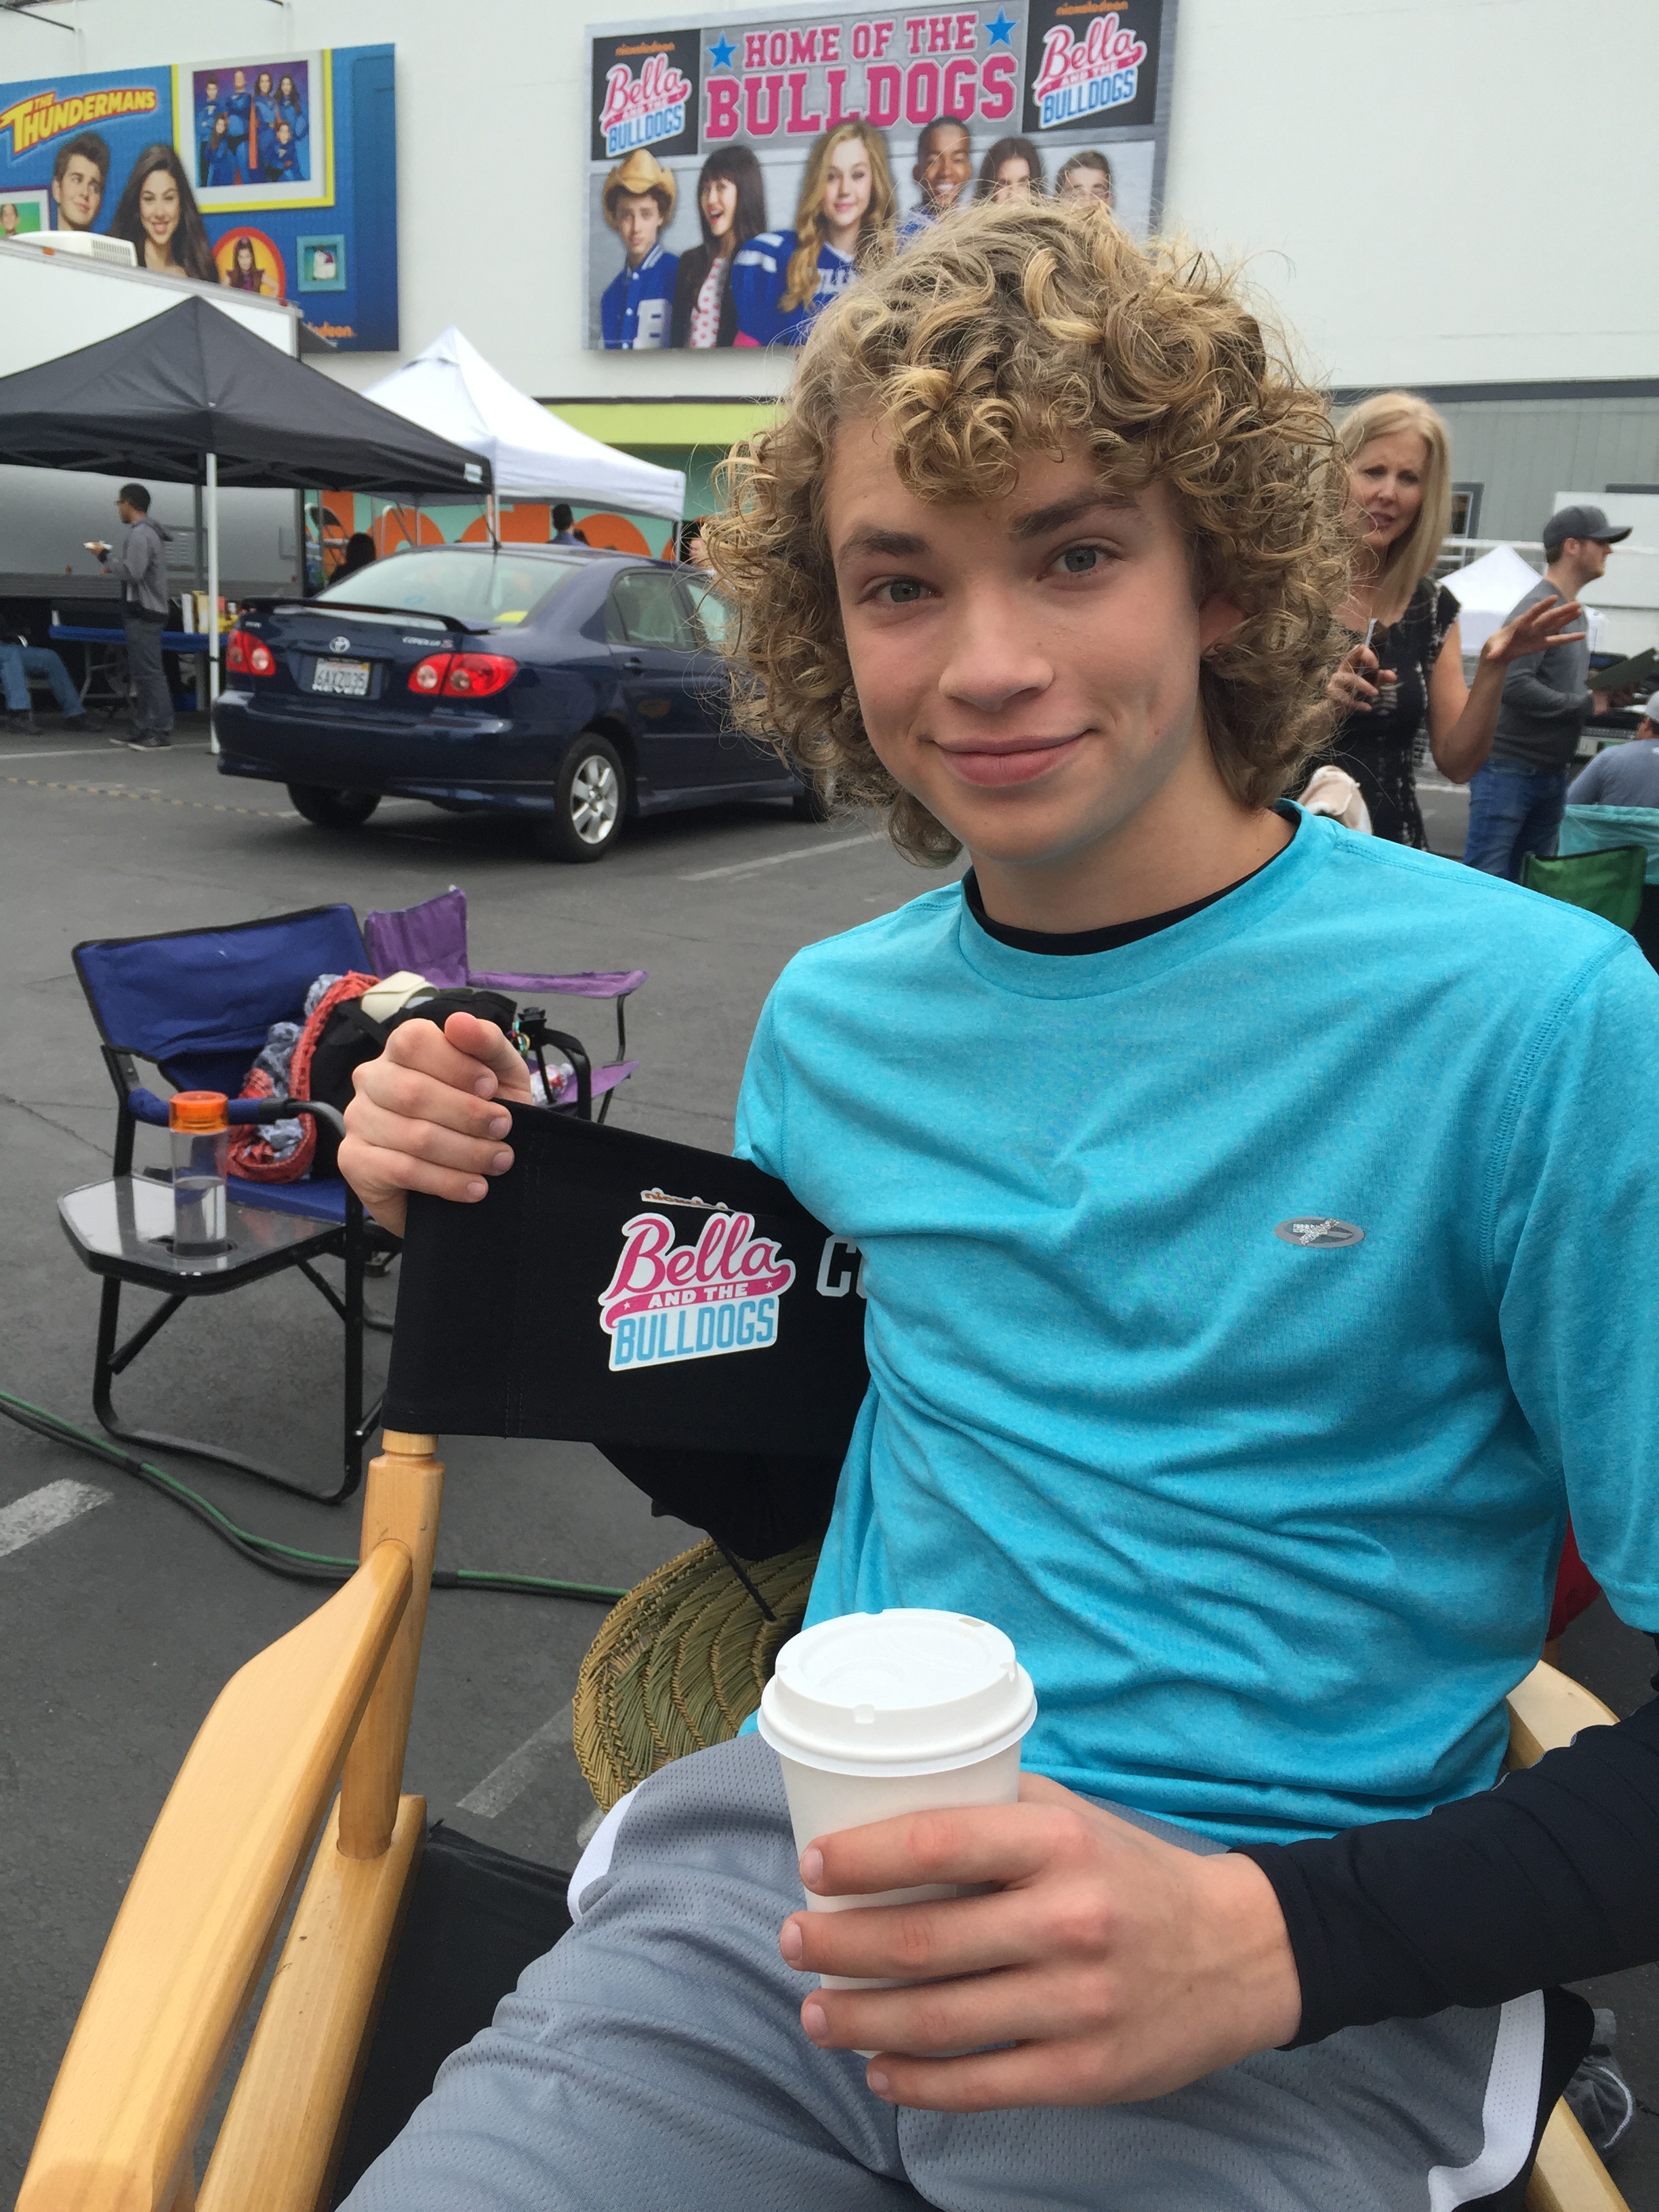 Will Meyers as Hunter on NICKELODEON's Bella and the Bulldogs ~ Ep 18 